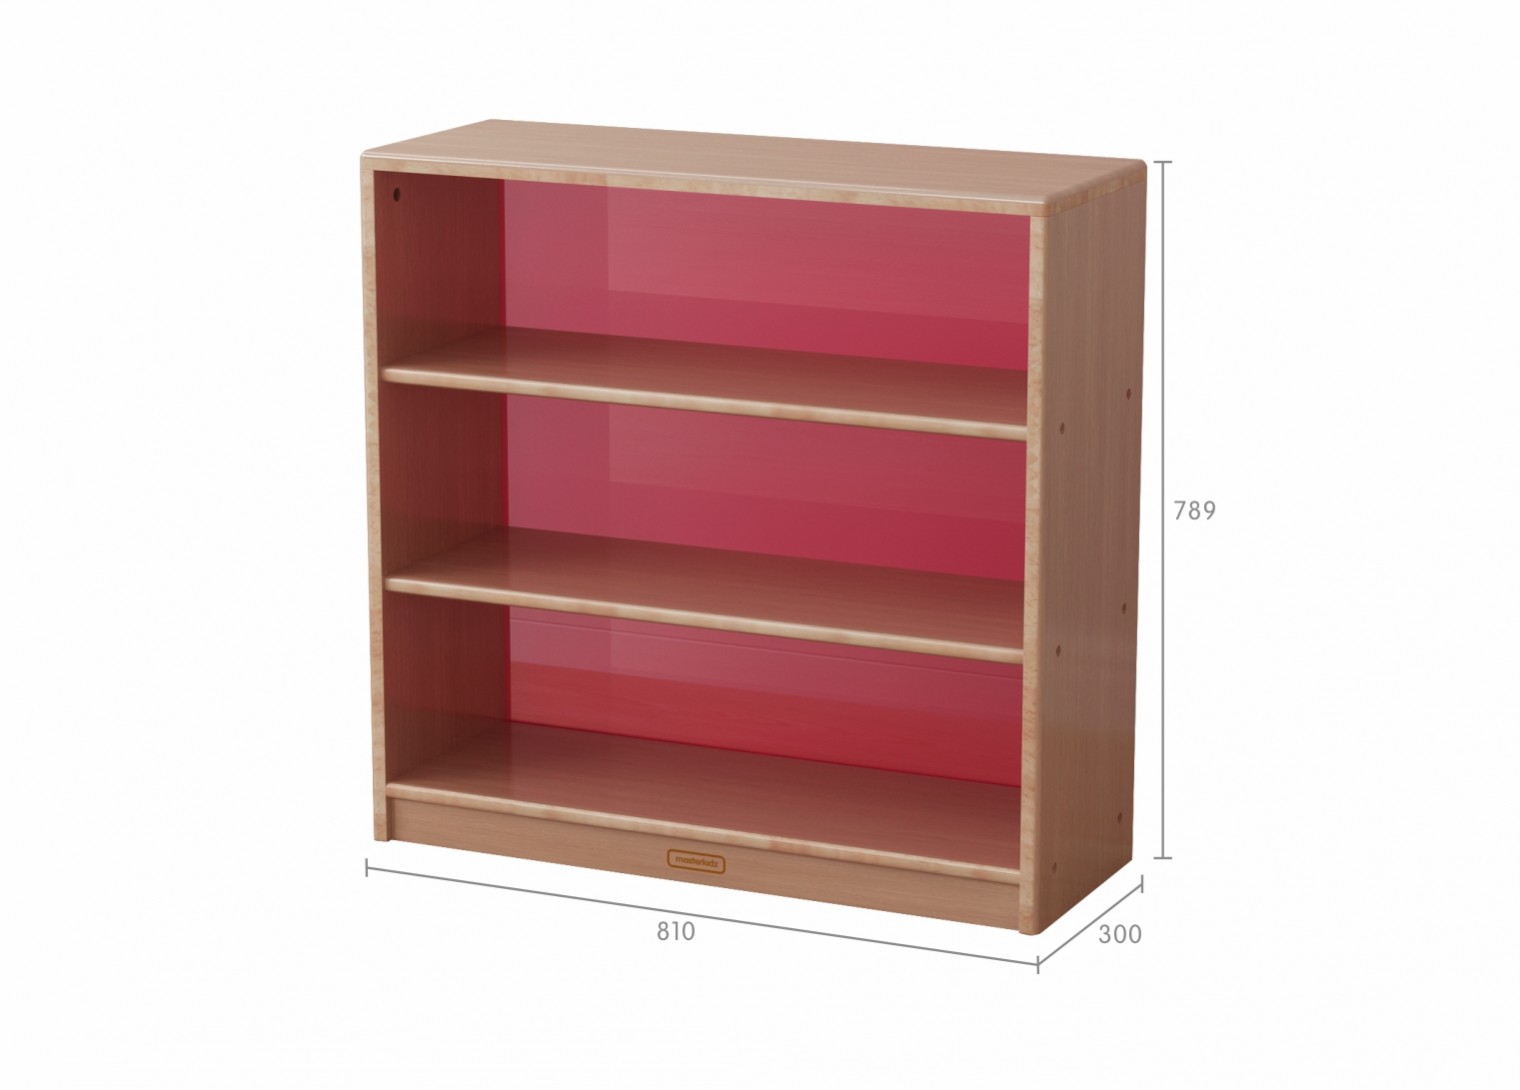 Forest School - 789H x 810L Wooden  Shelving Unit - Translucent Red Back